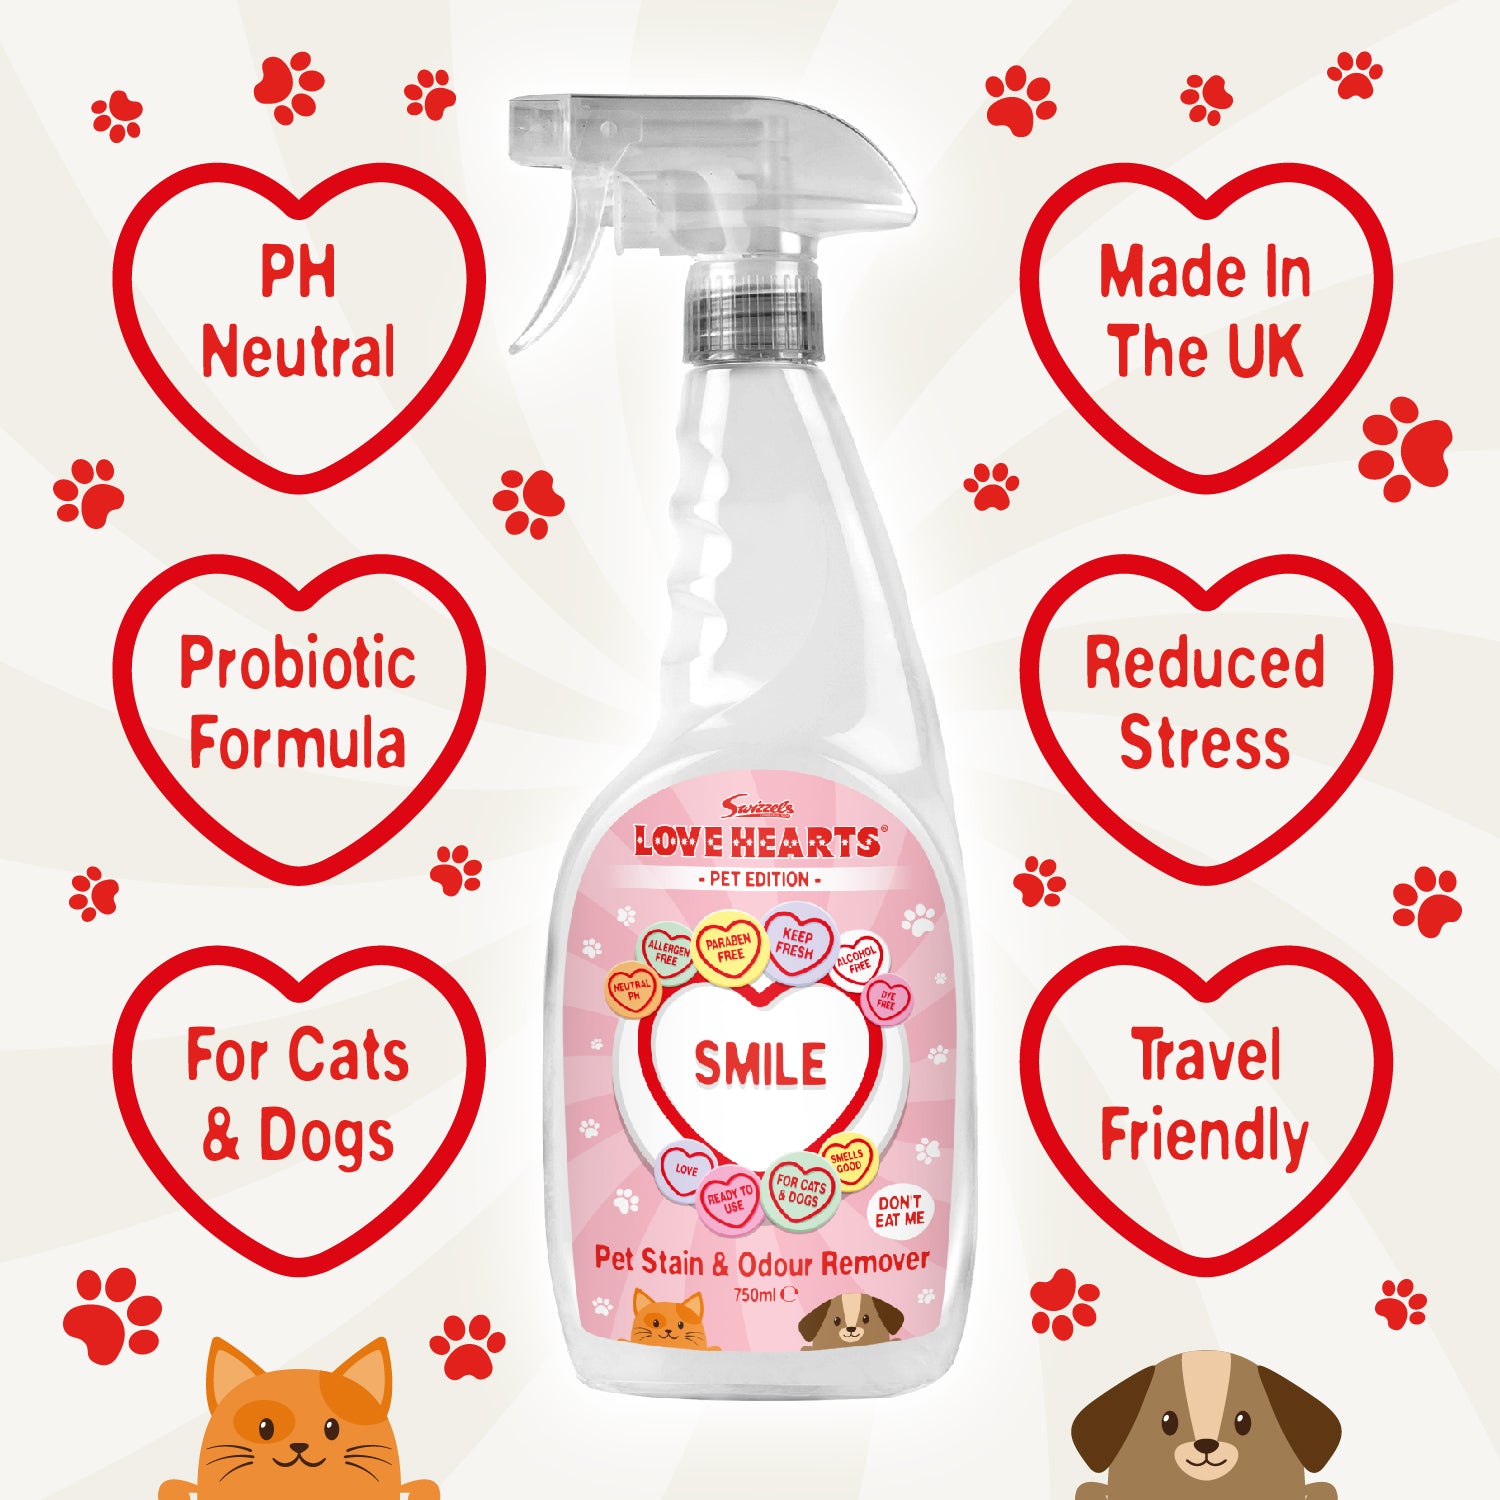 Swizzels Love Hearts - Stain & Odour Remover 2 x 750ml